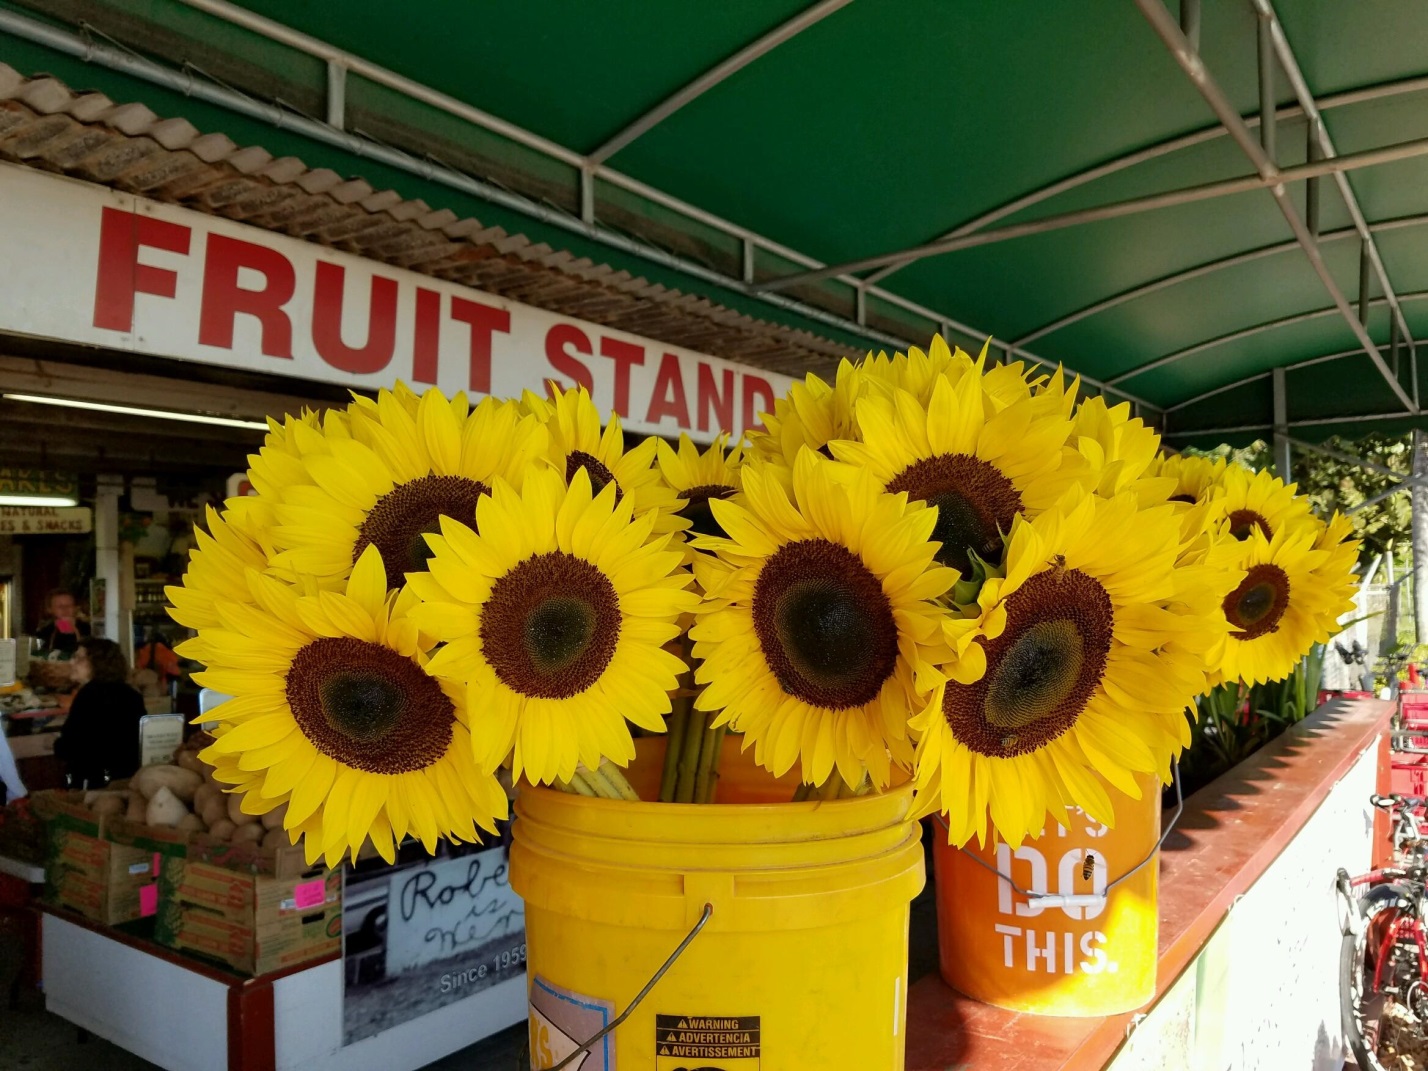 Bright sunflowers for sale in a bucket at a farmers market.